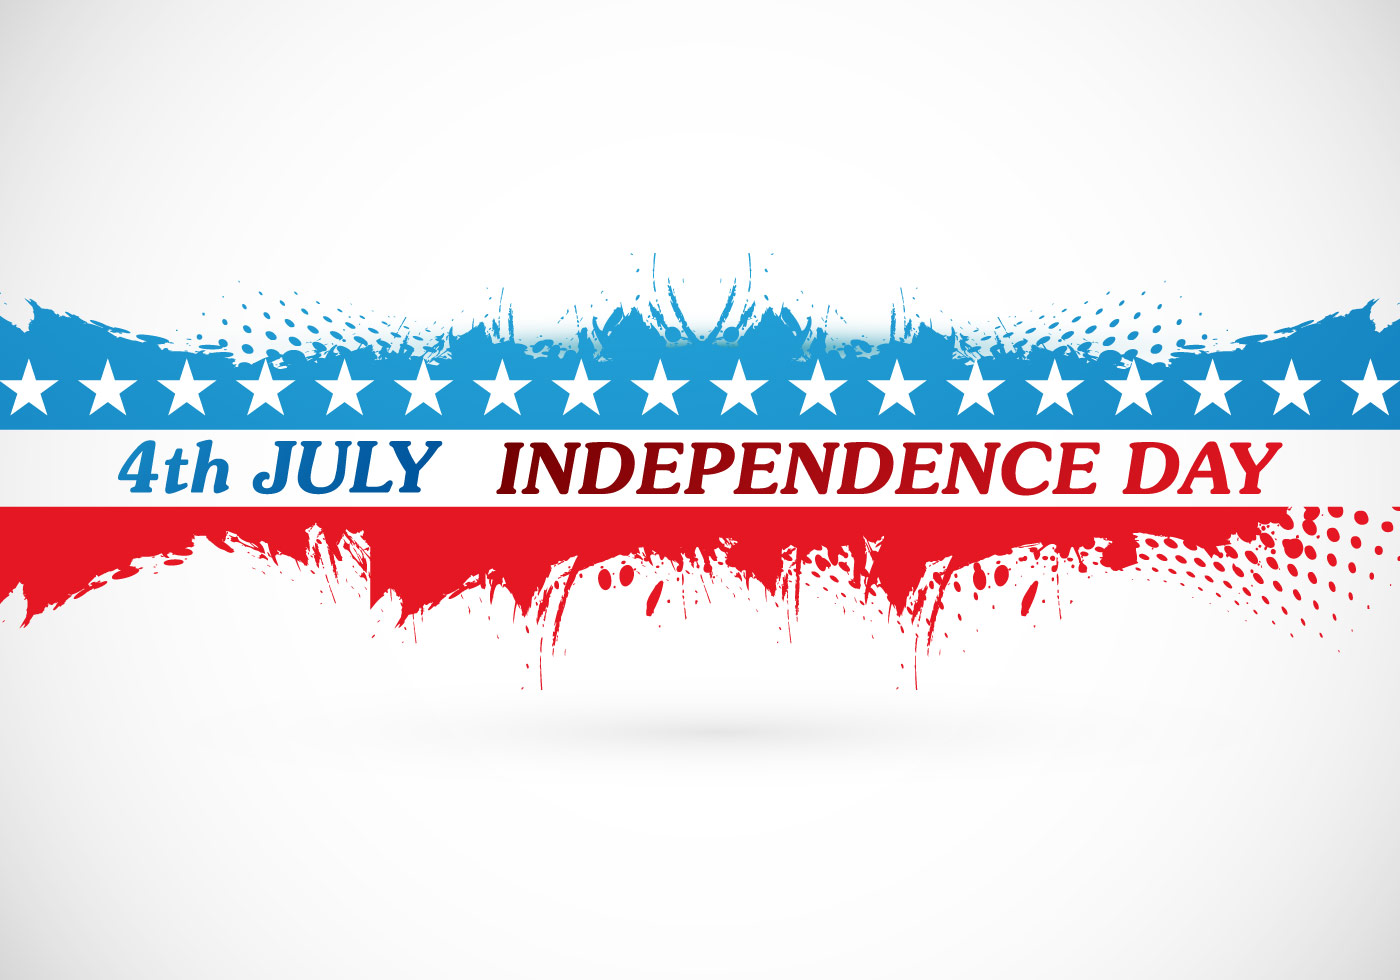 free clipart images independence day - photo #9